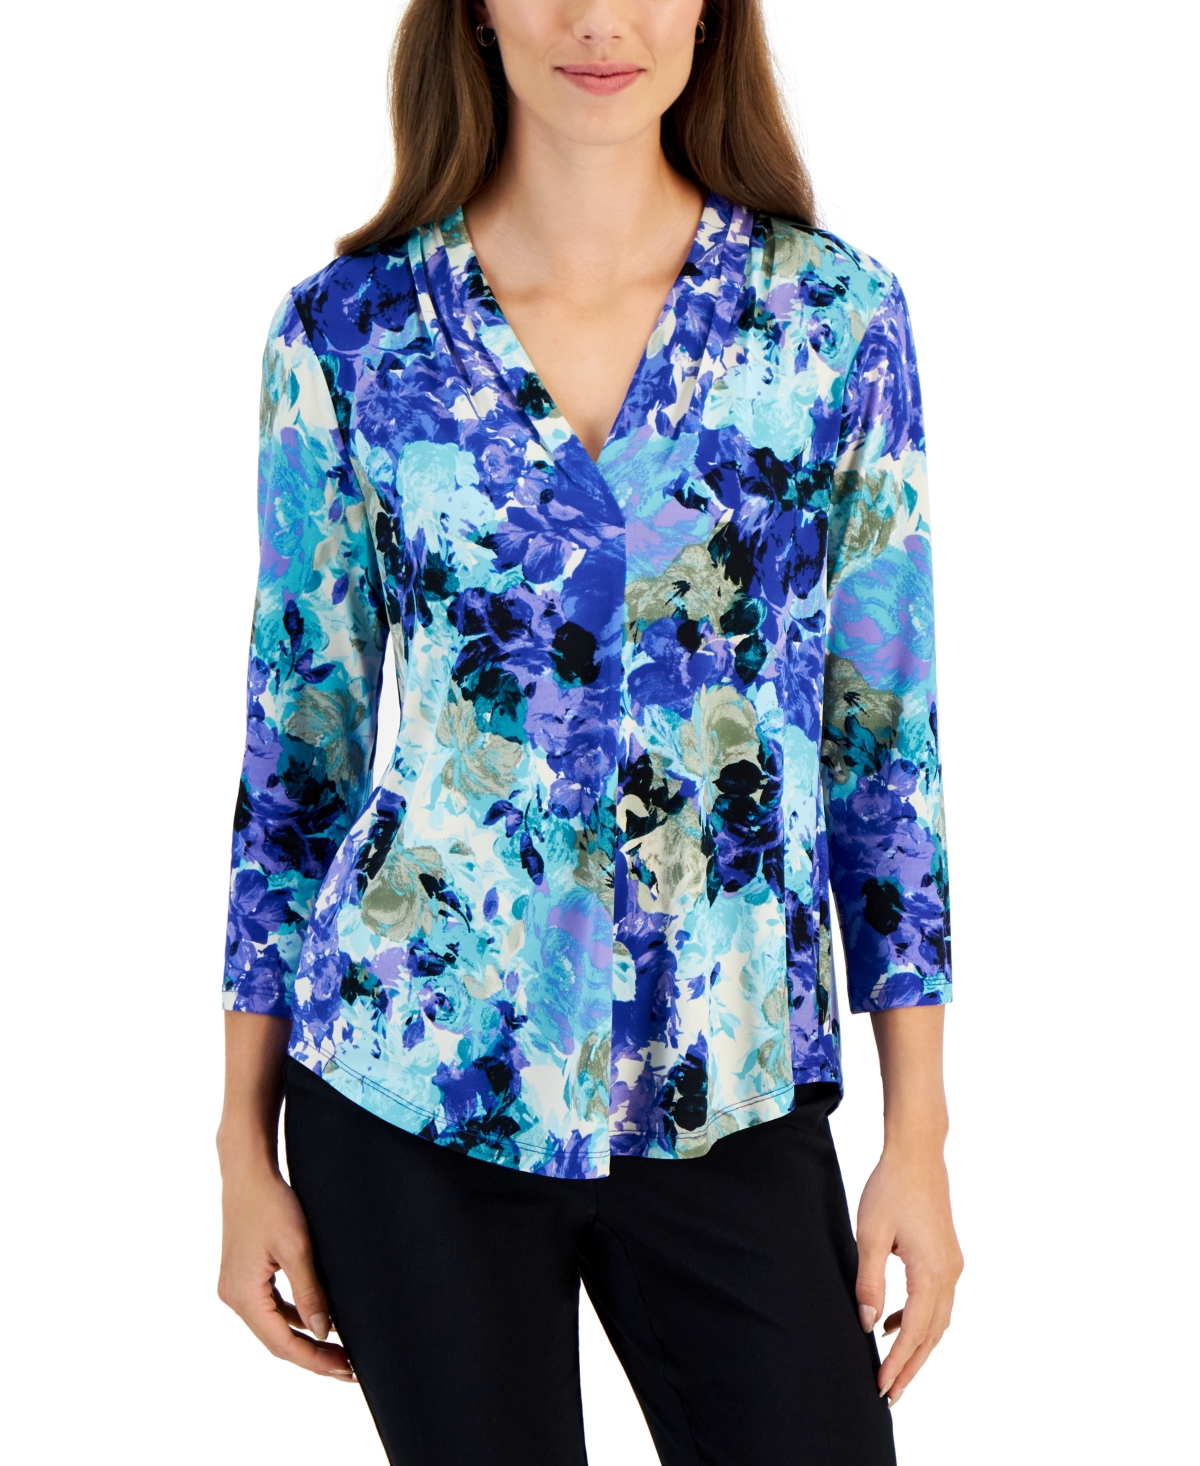 Jm Collection Plus Sea Of Petals Utility Top, Created for Macy's